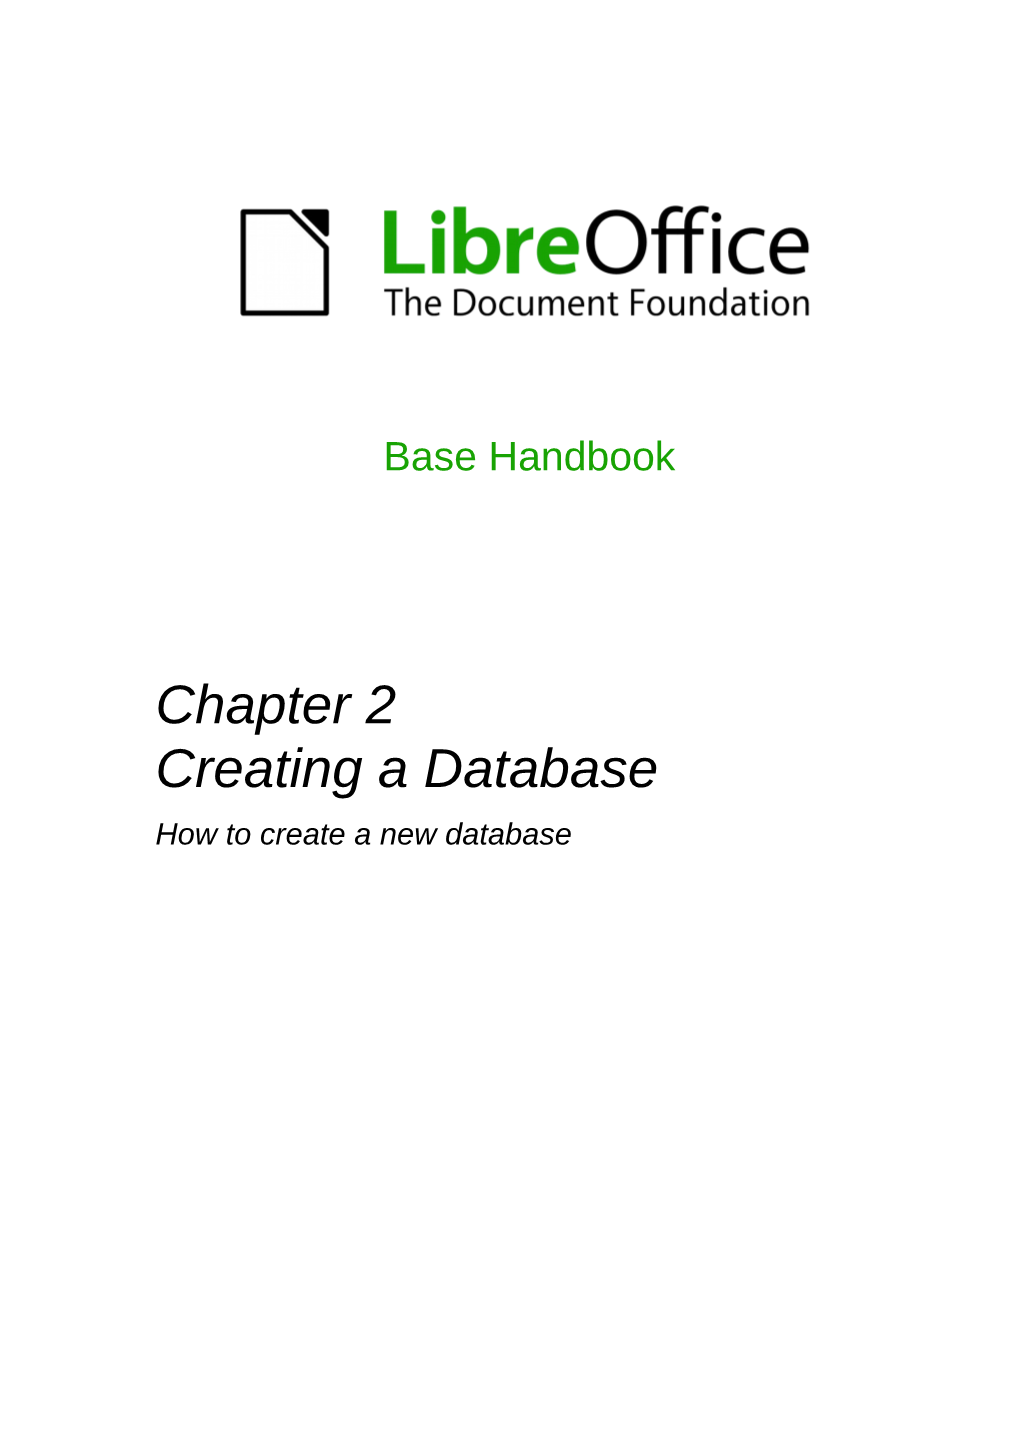 Chapter 2 Creating a Database How to Create a New Database Copyright